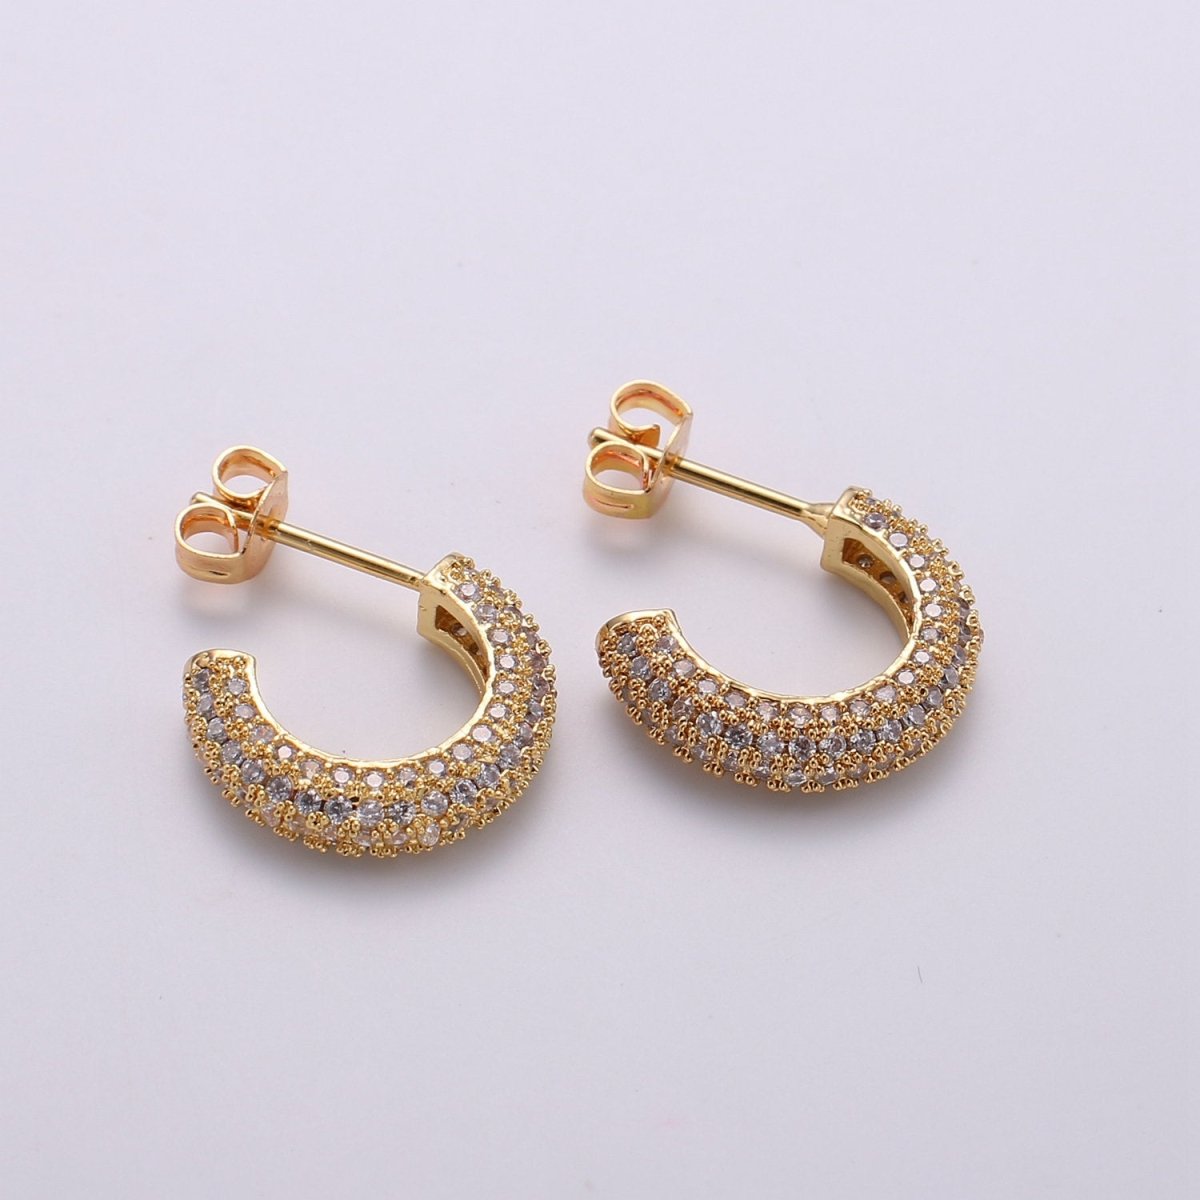 Gold Micro Pave Hoop Earrings Gold Chunky Earrings, CZ Color Hoop Earrings, Modern Style, Gold Minimalist Earrings Q-271 - Q-276 - DLUXCA